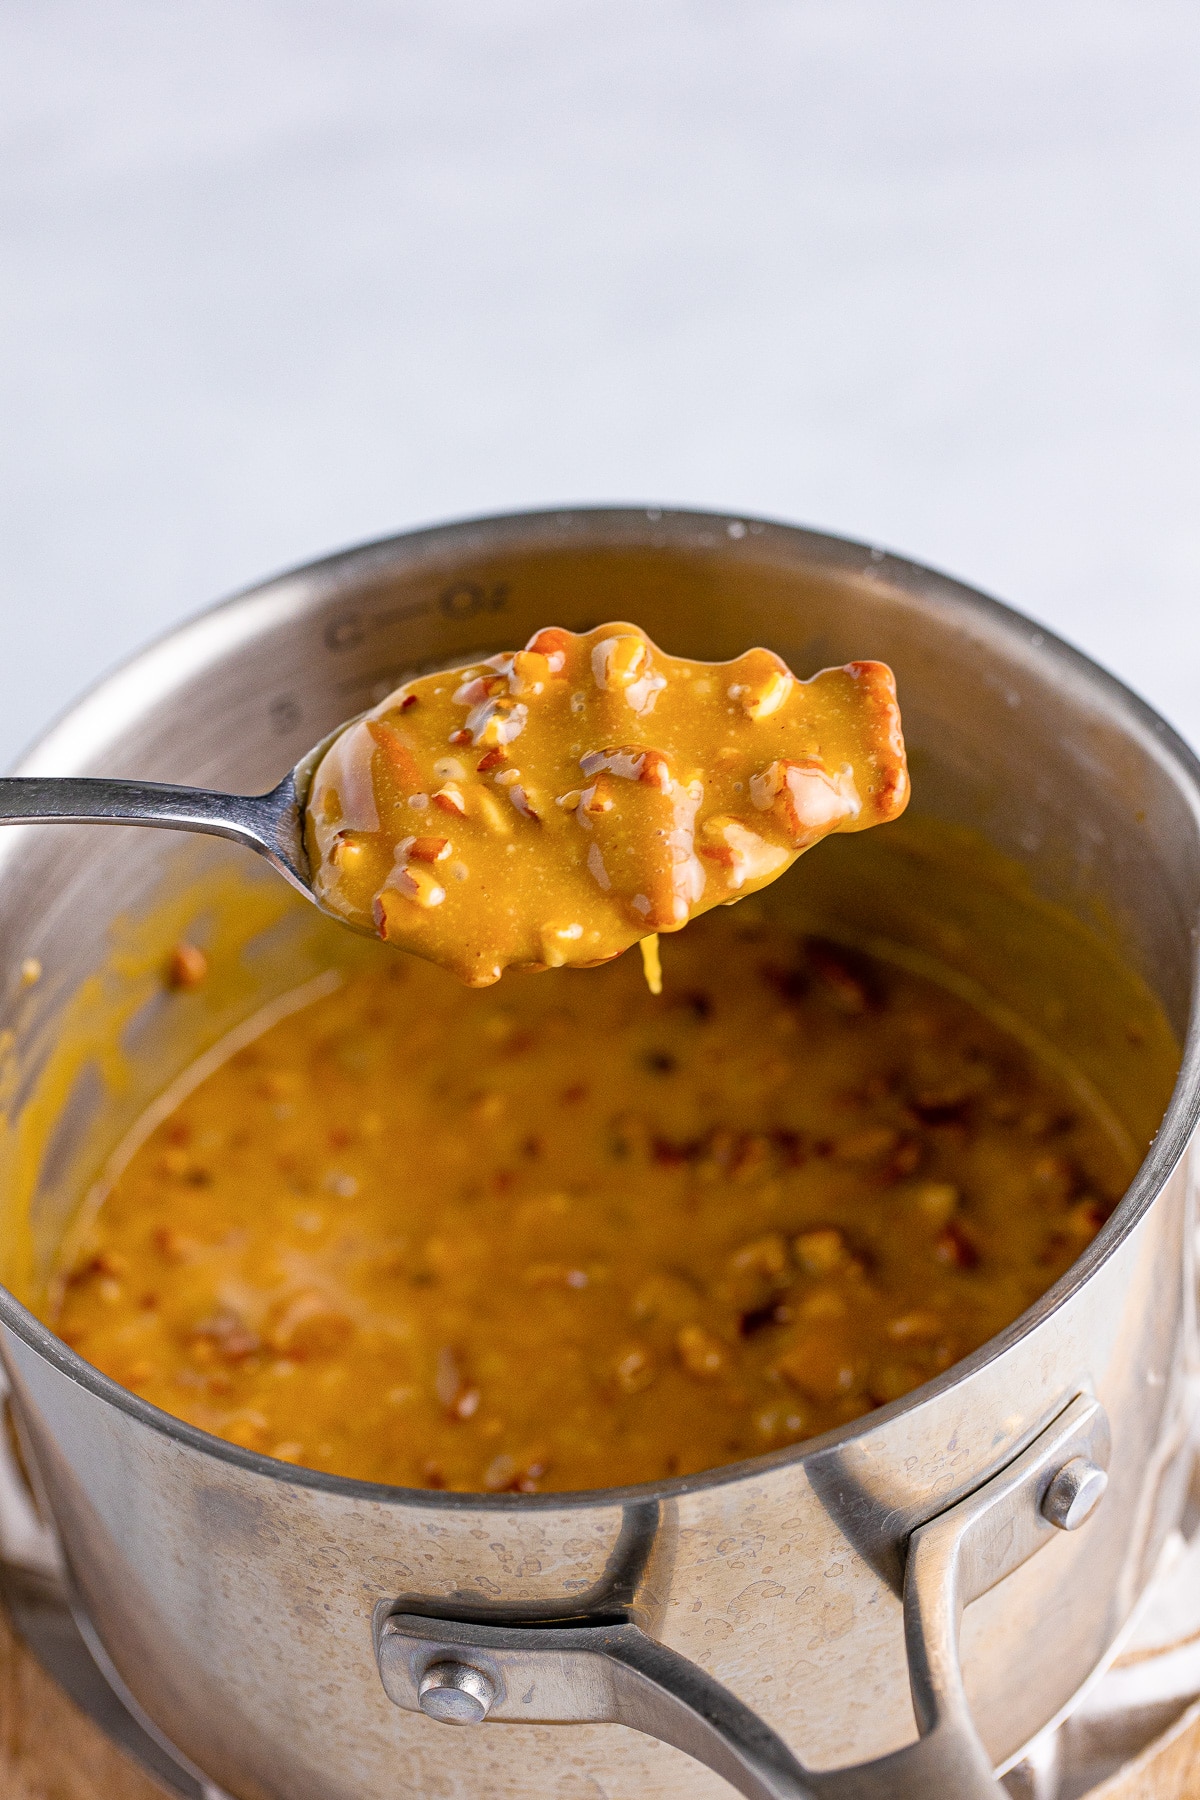 A spoon full of pumpkin praline mixture being lifted from a pot.